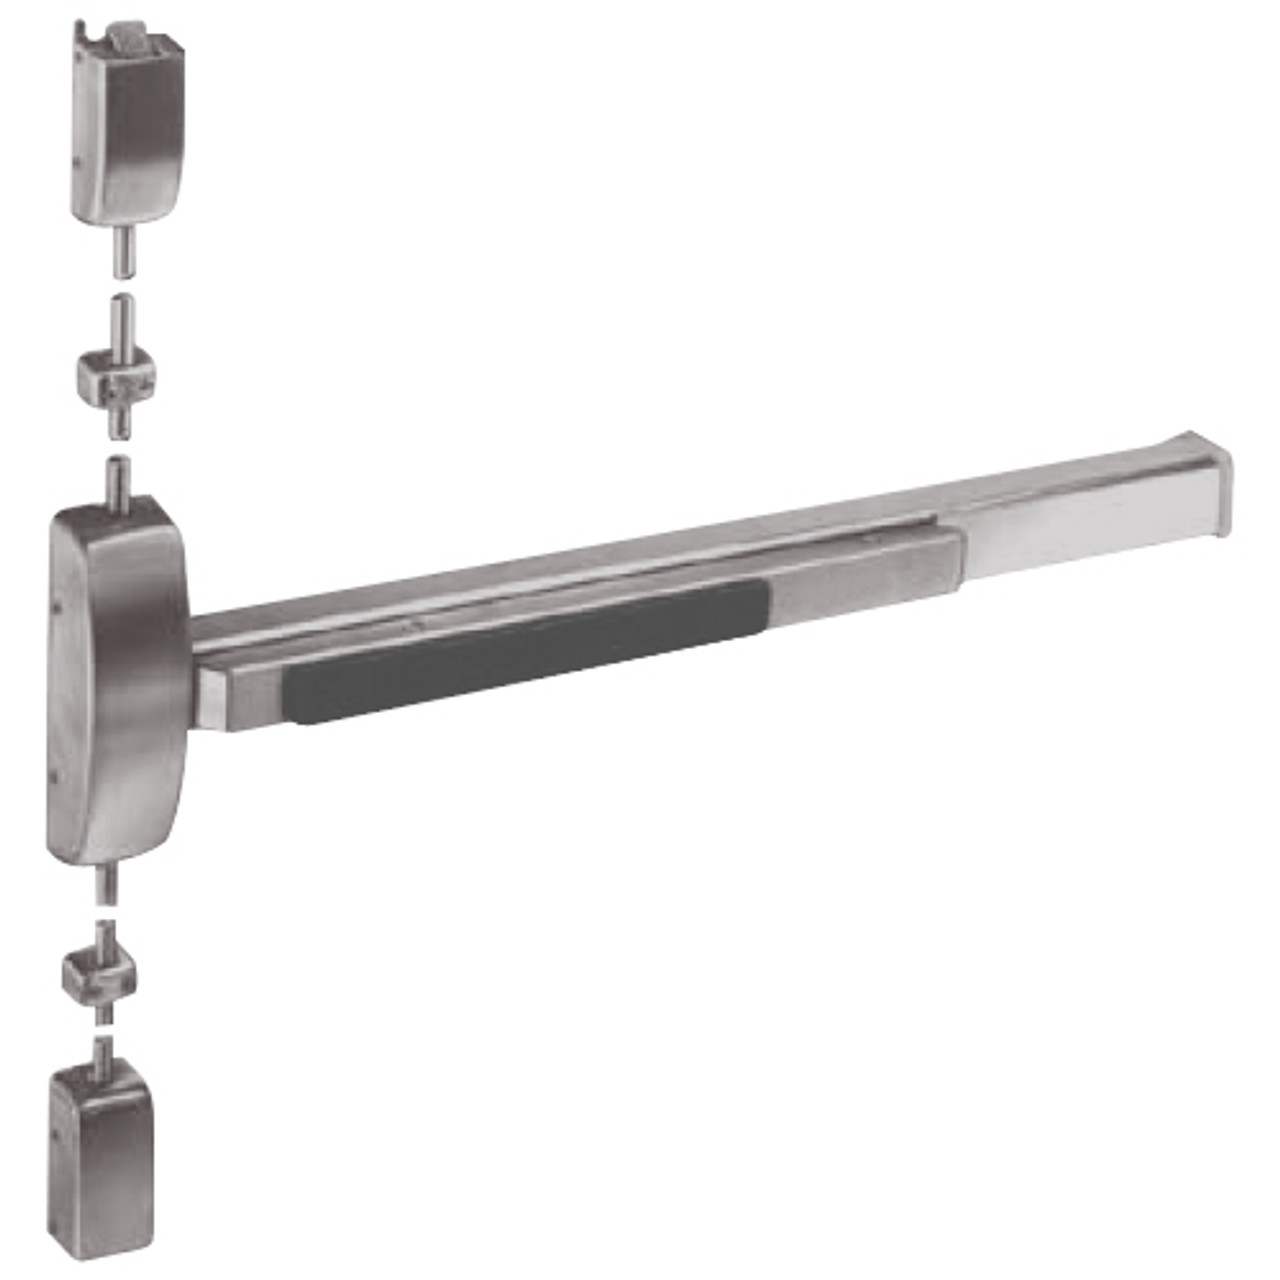 12-8710J-RHR-32D Sargent 80 Series Exit Only Fire Rated Surface Vertical Rod Exit Device in Satin Stainless Steel